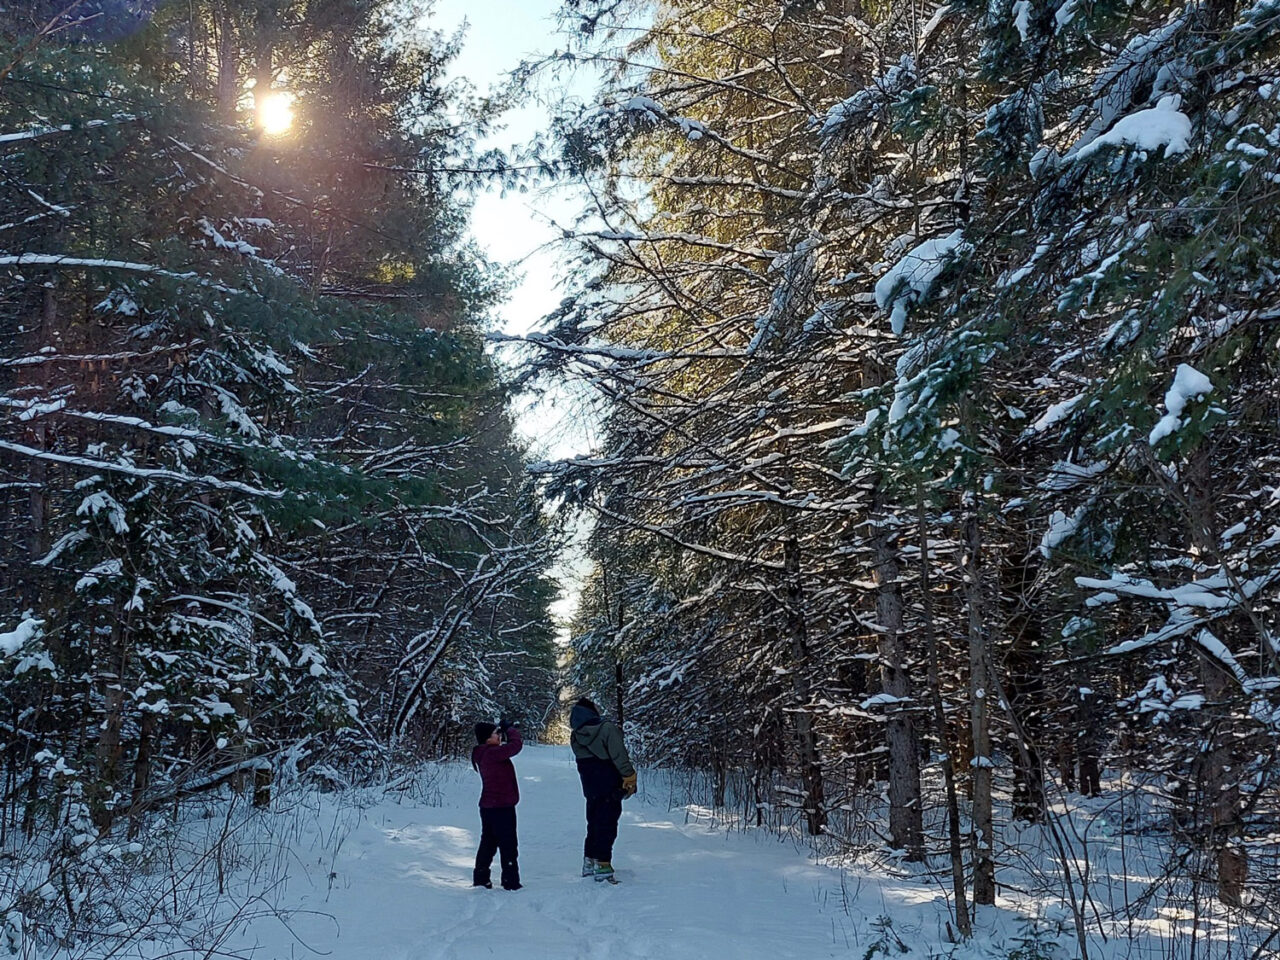 Two people birdwatching on a snow-covered trail through evergreen woods.